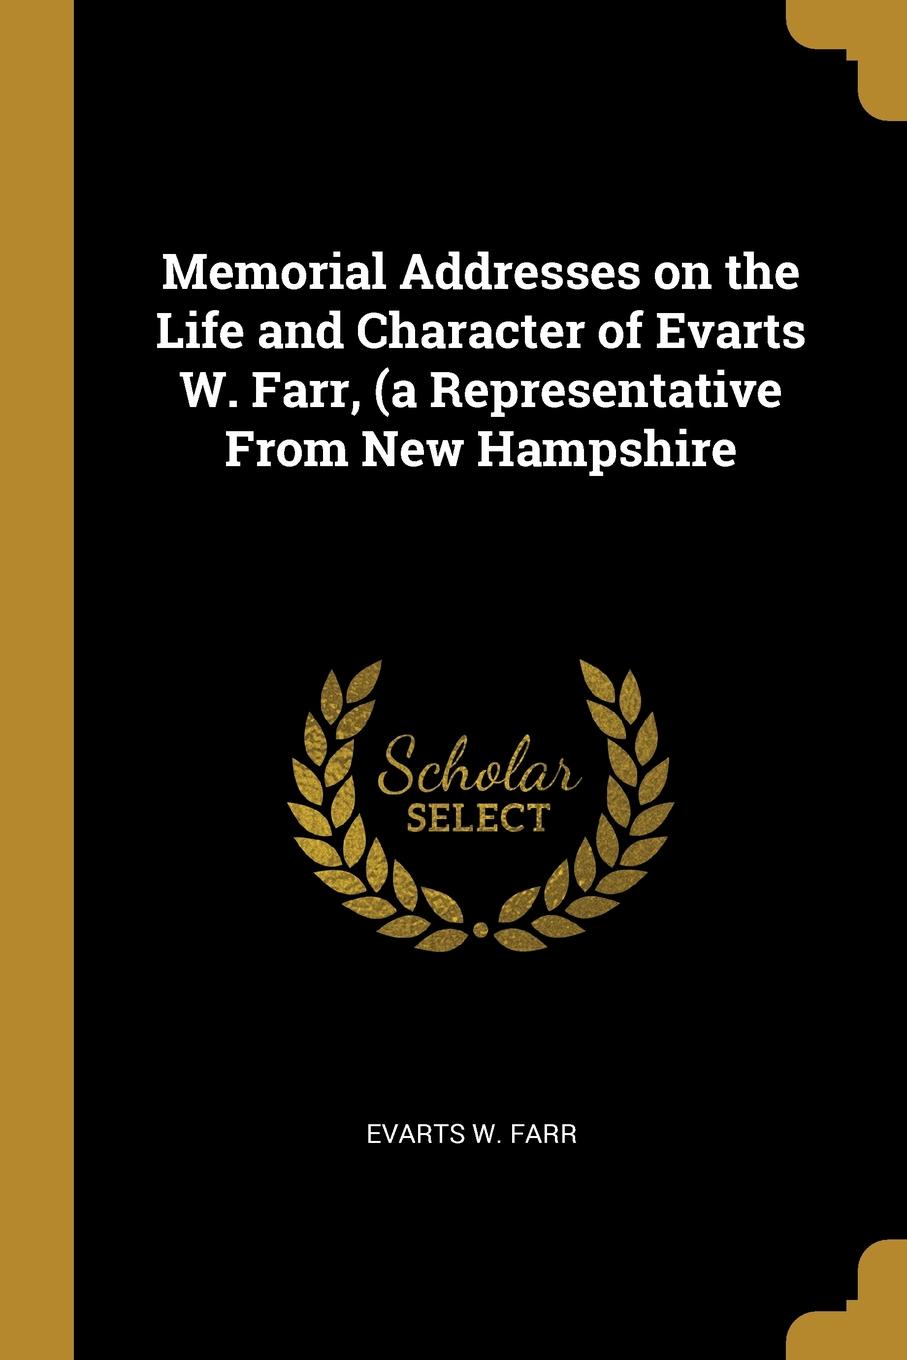 Memorial Addresses on the Life and Character of Evarts W. Farr, (a Representative From New Hampshire